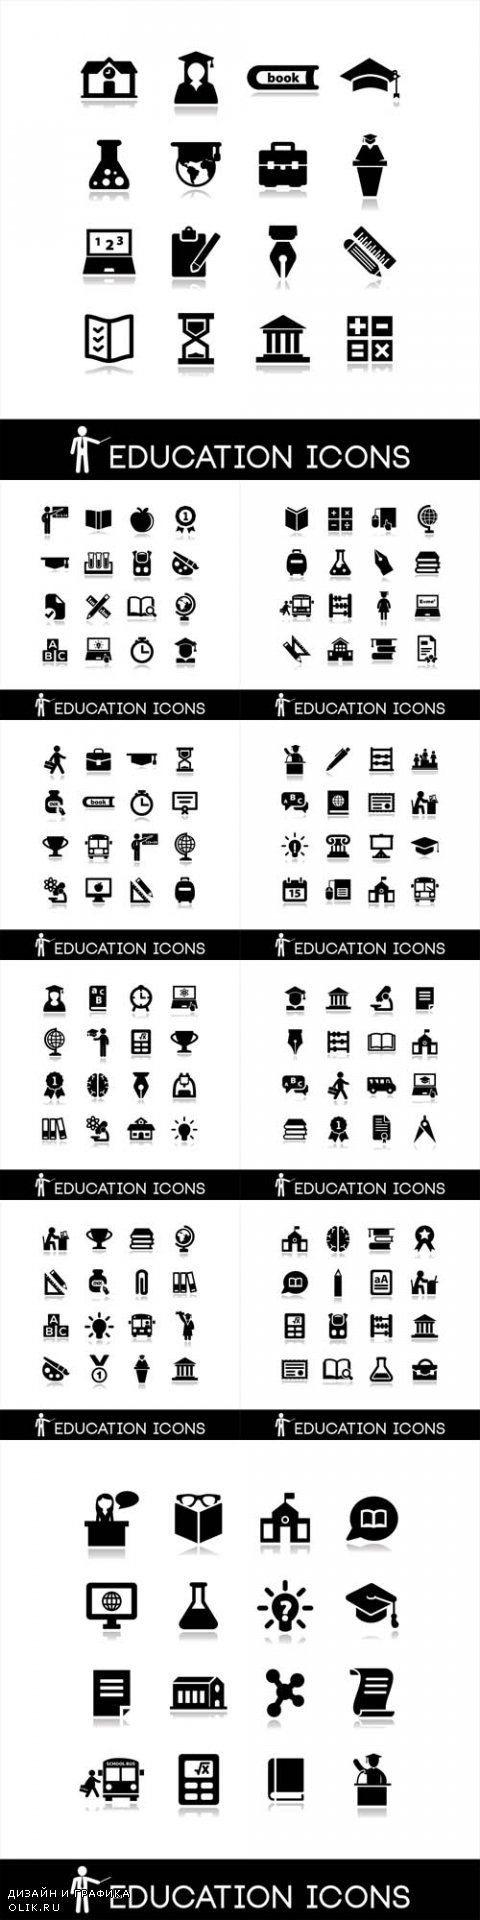 Vector Education and Learning Icons